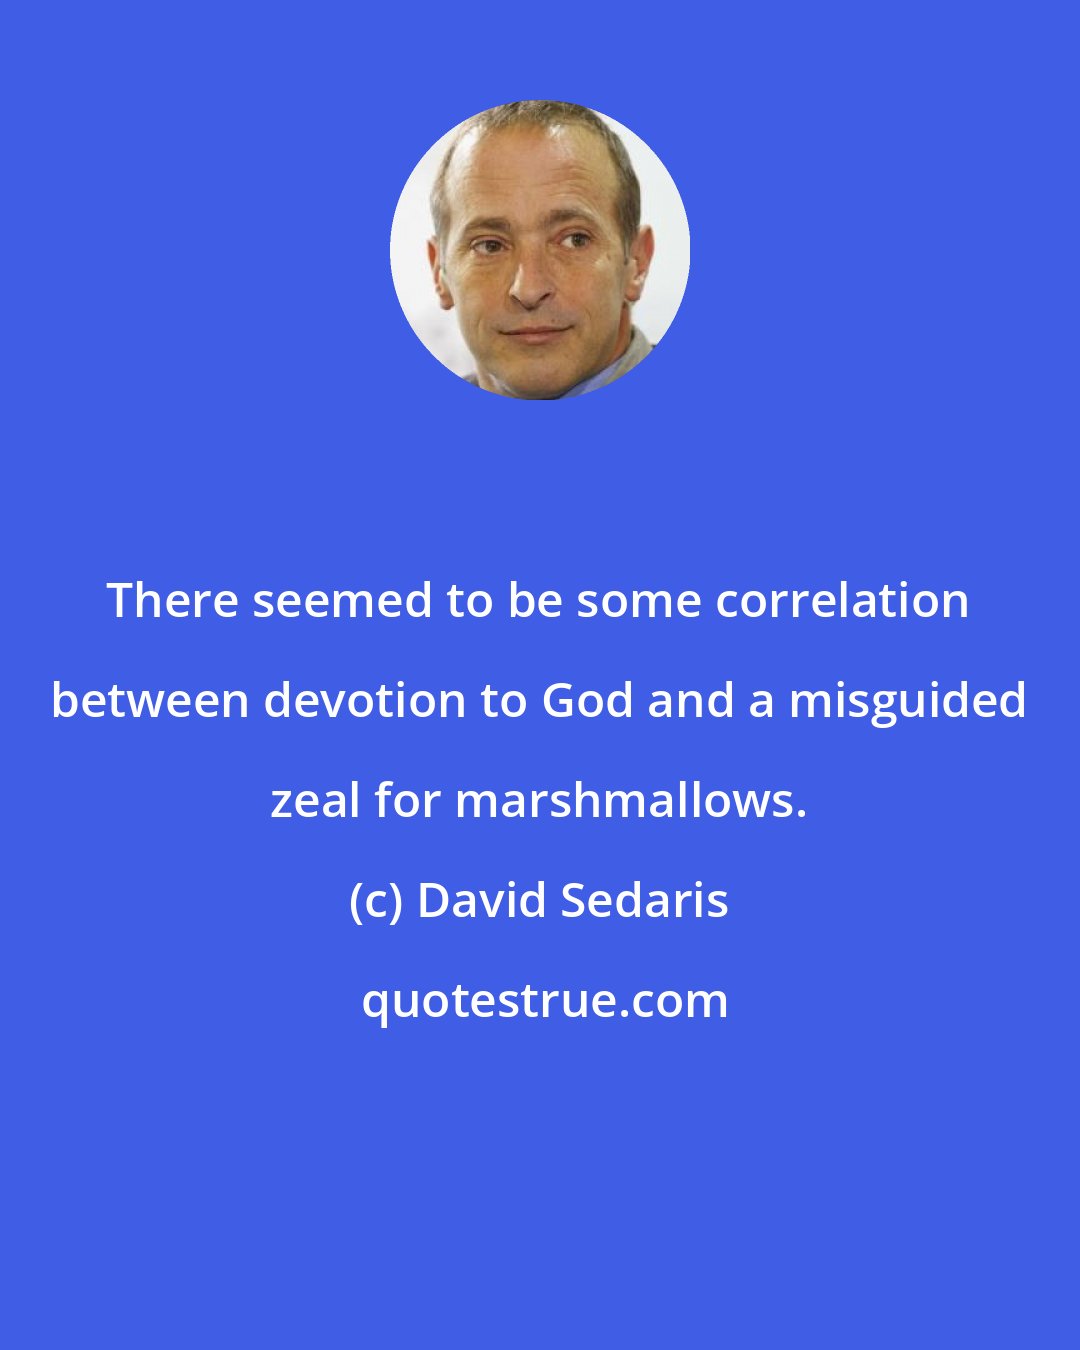 David Sedaris: There seemed to be some correlation between devotion to God and a misguided zeal for marshmallows.